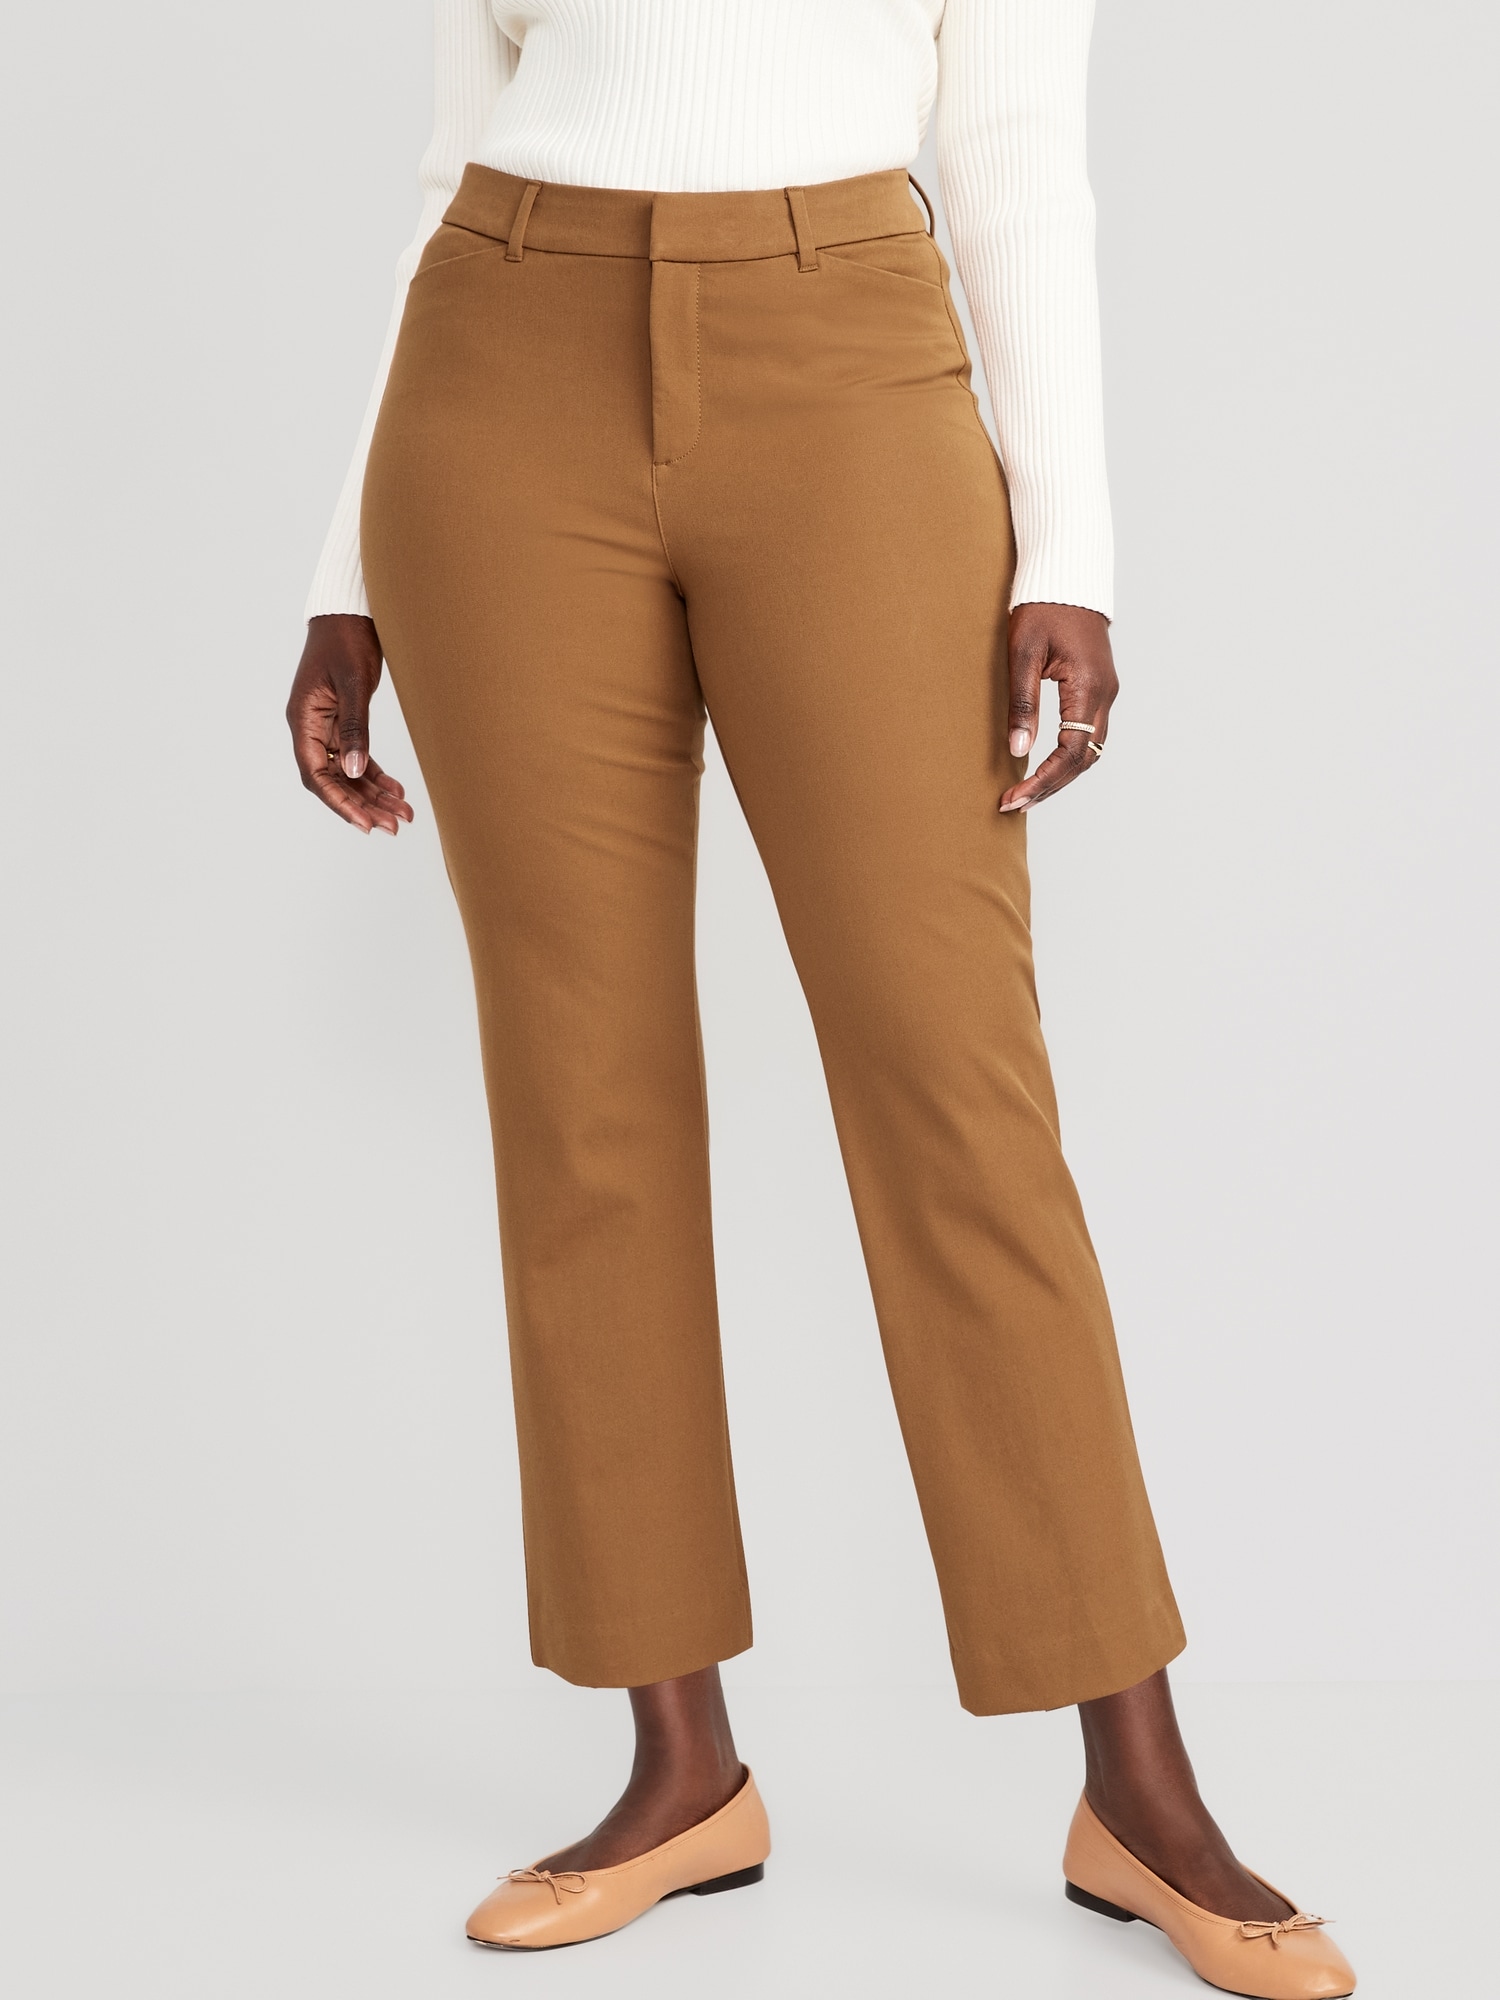 High-Waisted Pixie Straight Ankle Pants for Women, Old Navy